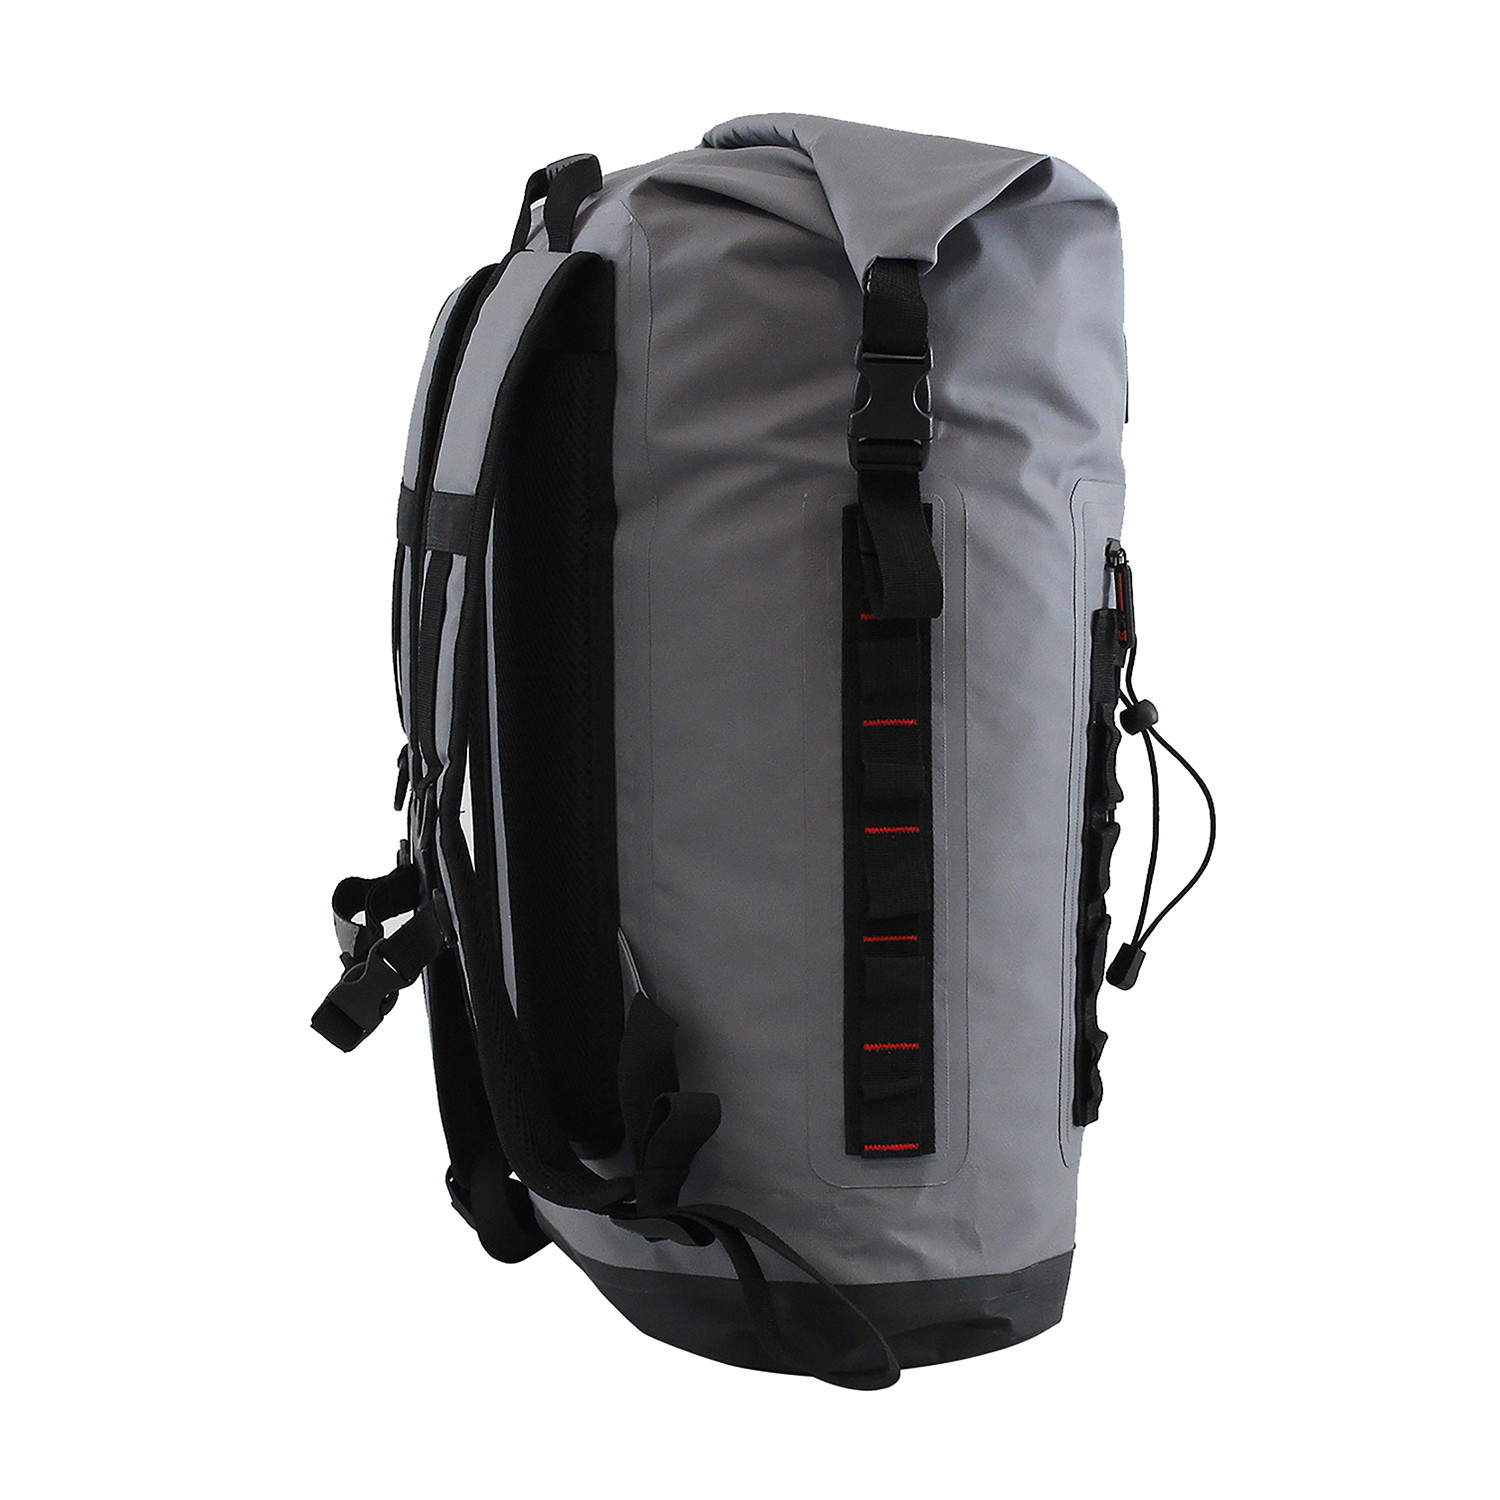 Storm Dry Bag Backpack // 30 Liter // Carbon Gray - The K3 Company ...